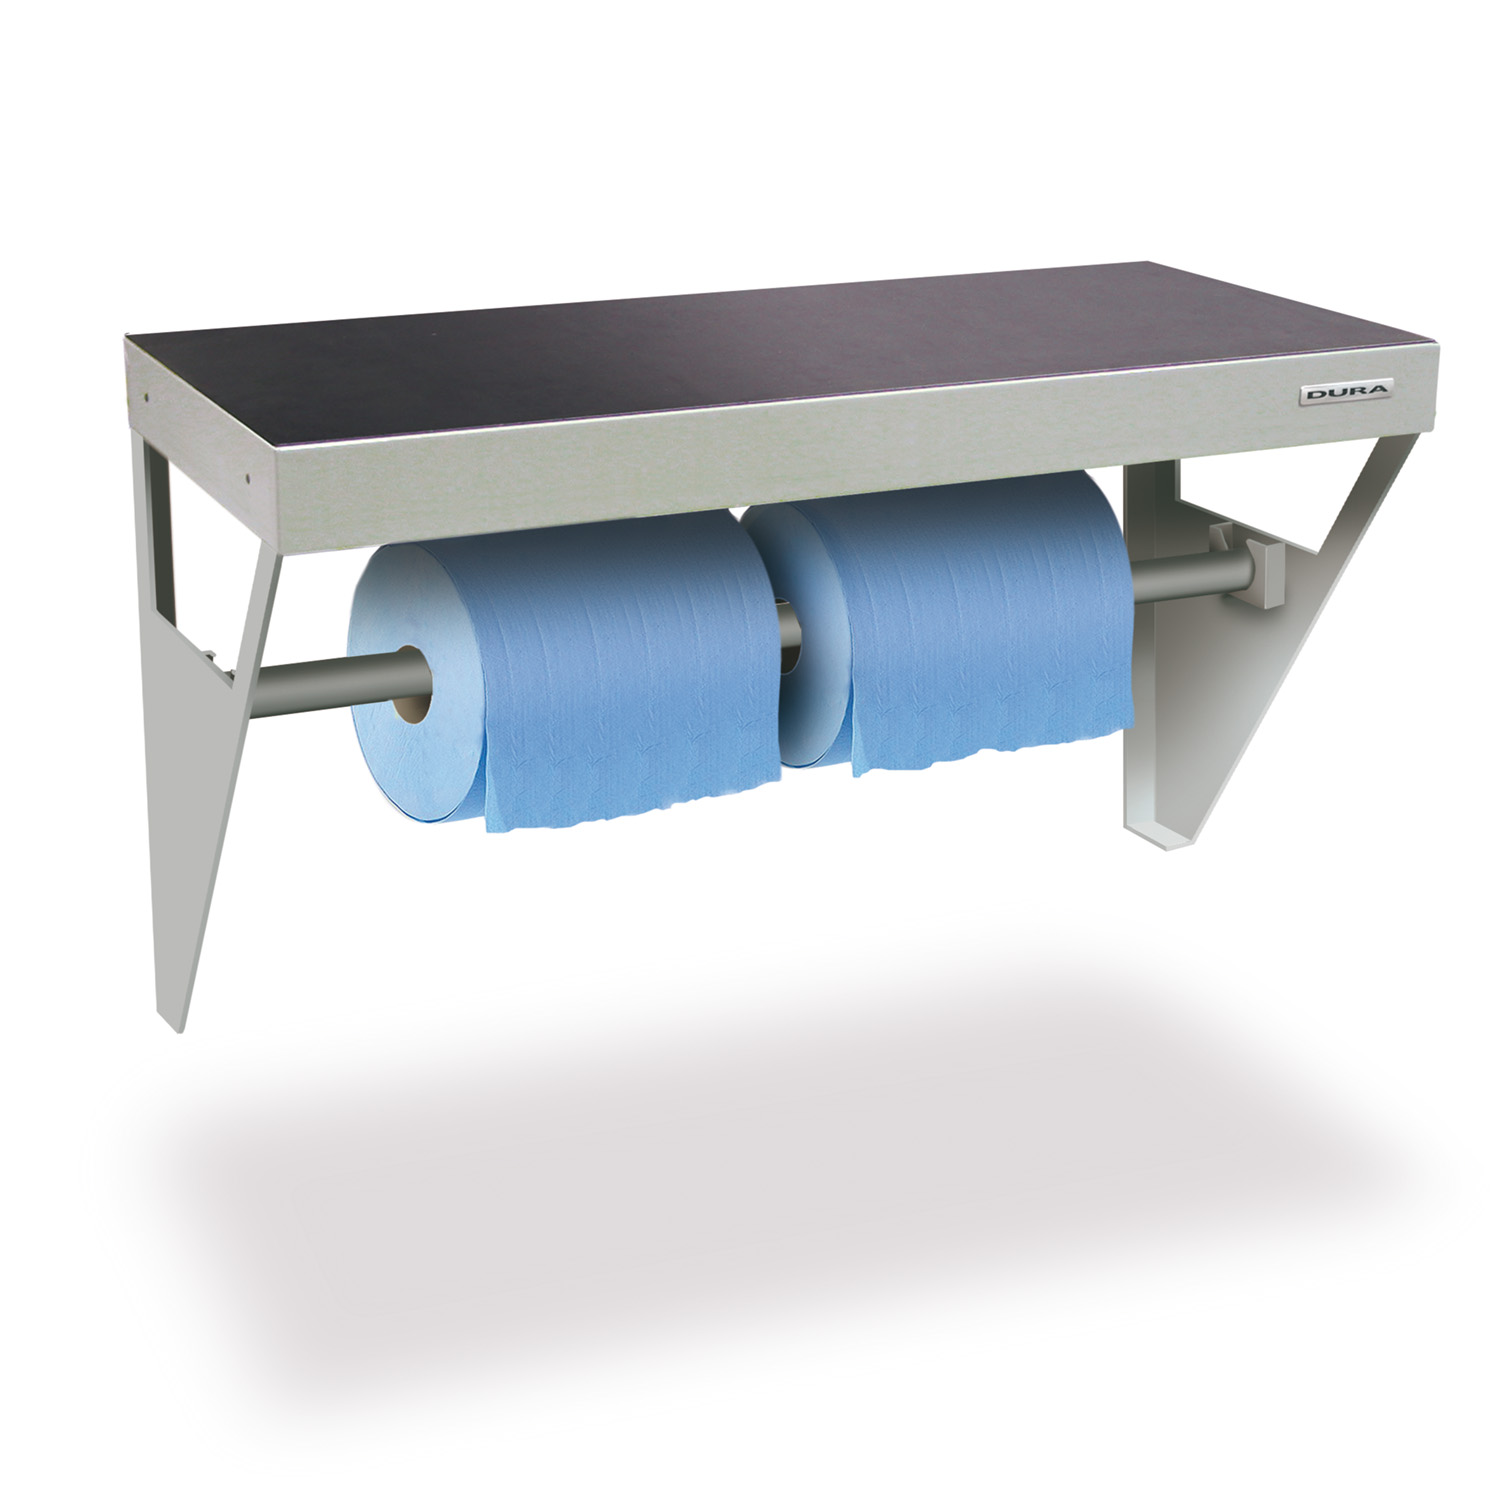 Wall-mounted workbench with roll holder (1200mm)